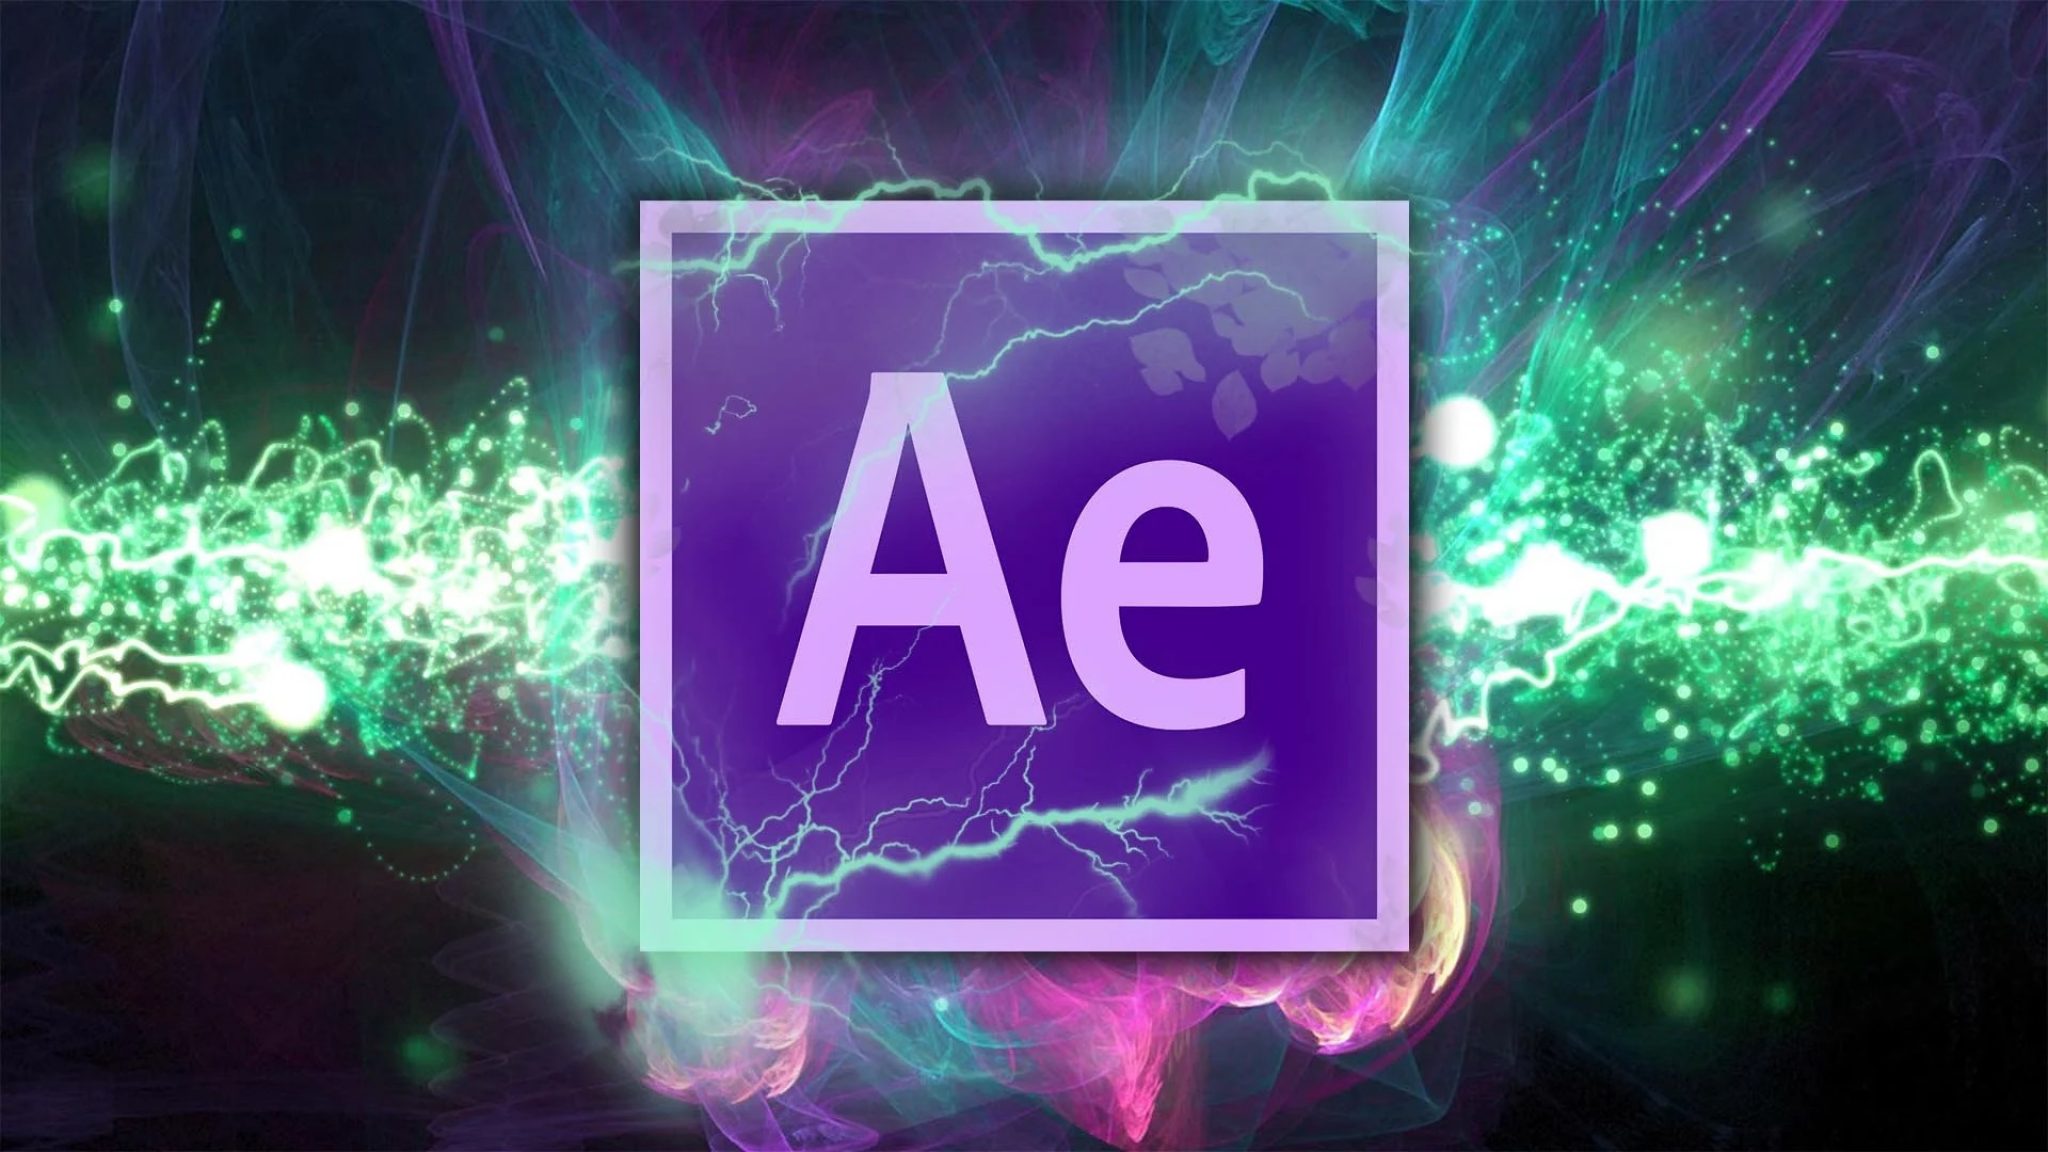 After effects packs. After Effects. Adobe after Effects. Adobe after Effects cc. Адоб Афтер эффект.